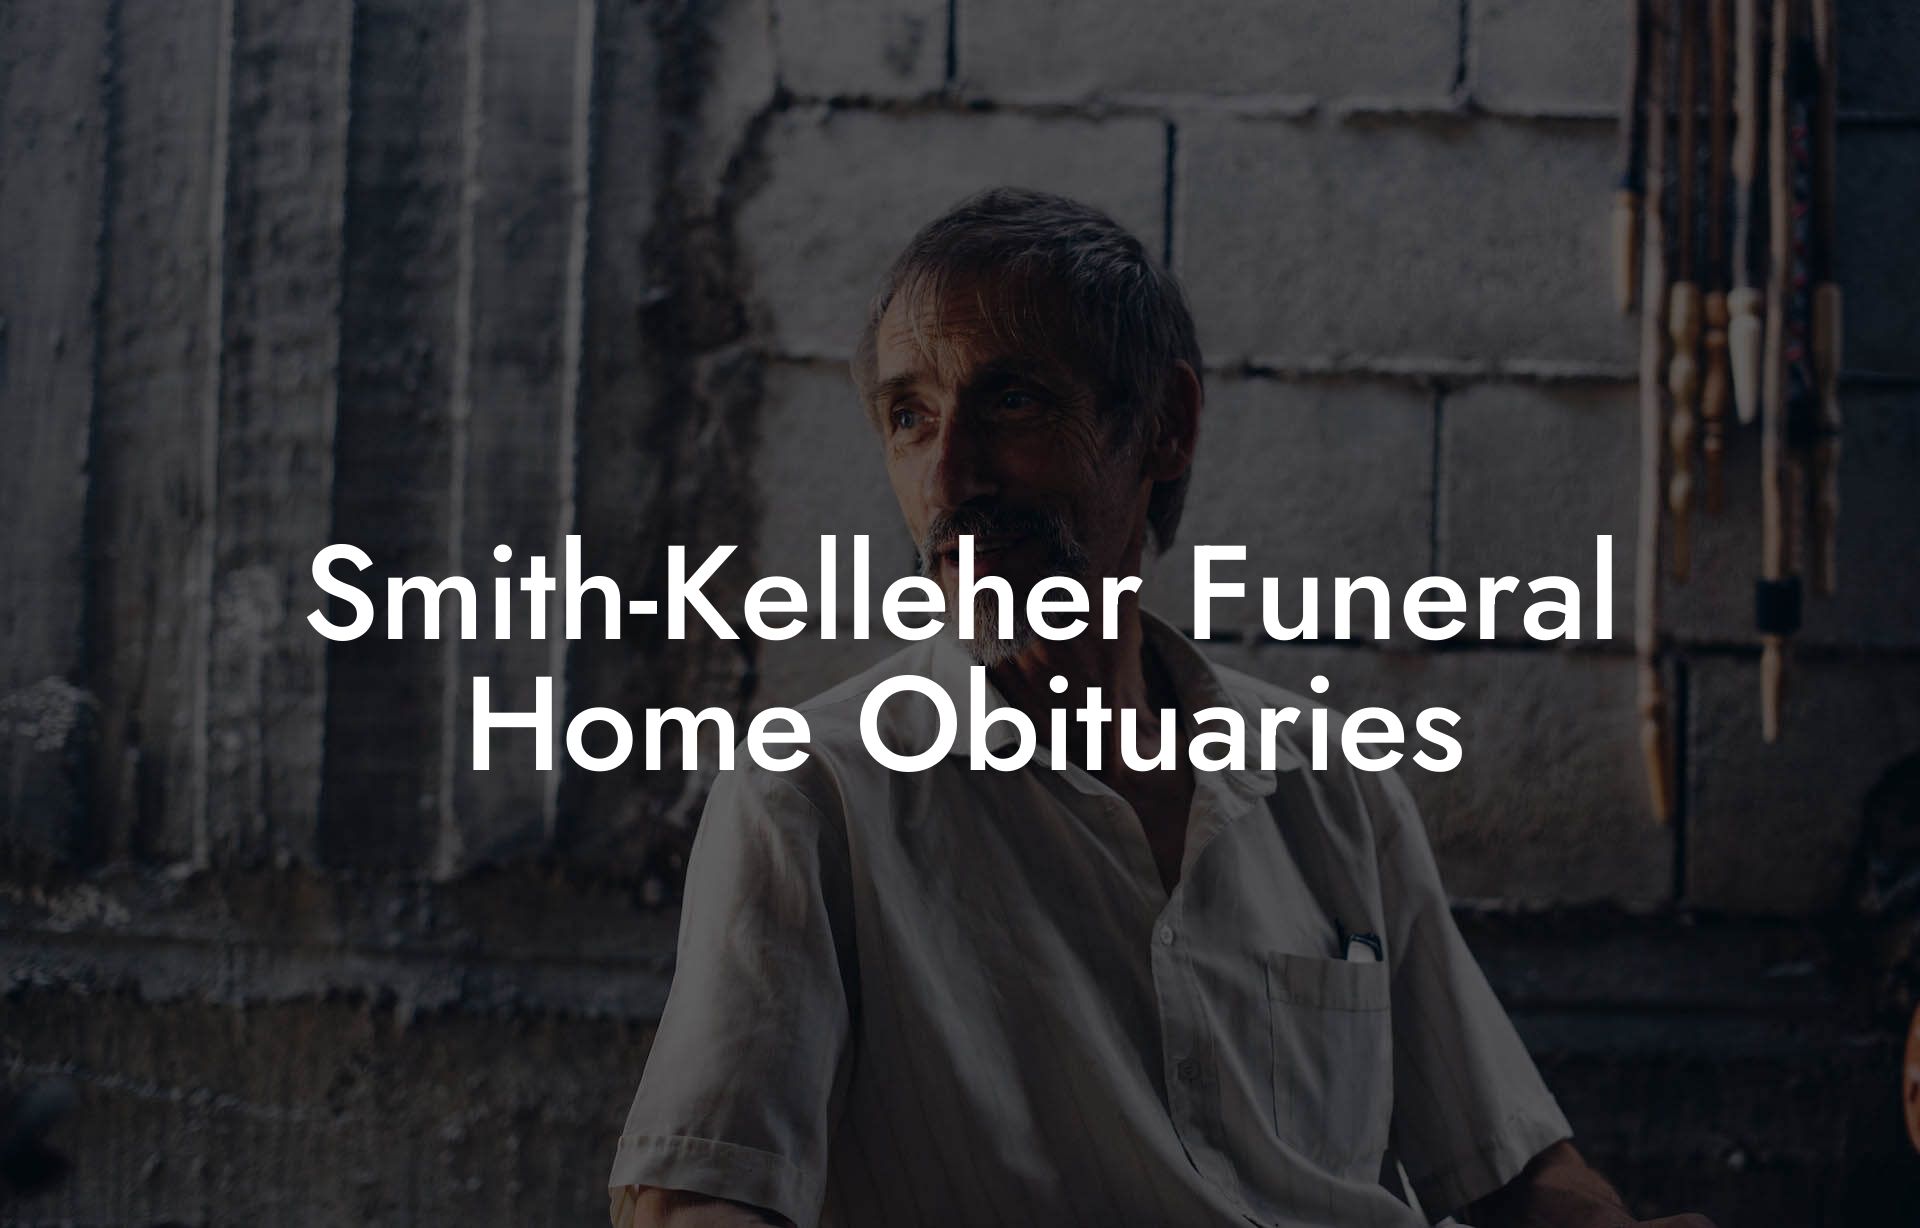 Smith-Kelleher Funeral Home Obituaries